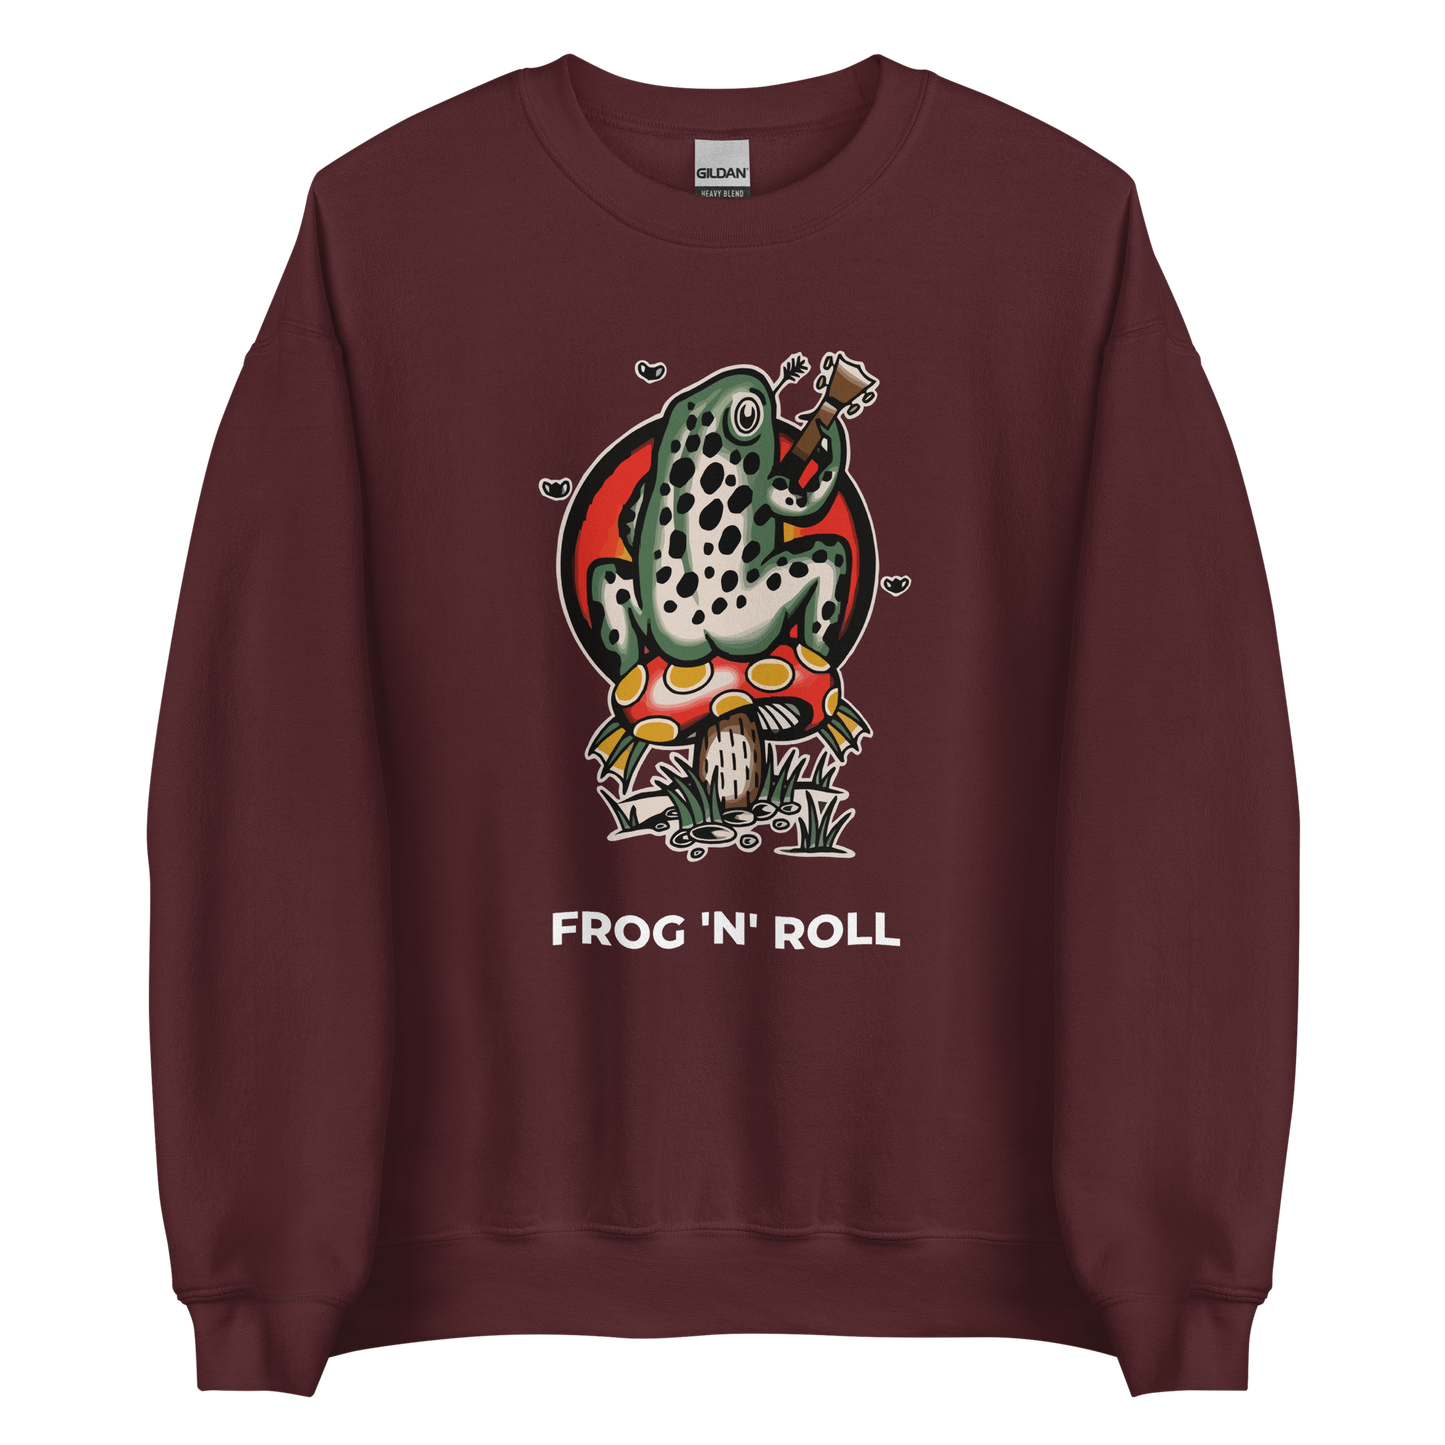 Maroon Frog Sweatshirt featuring the hilarious Frog 'n' Roll graphic on the chest - Funny Graphic Frog Sweatshirts - Boozy Fox